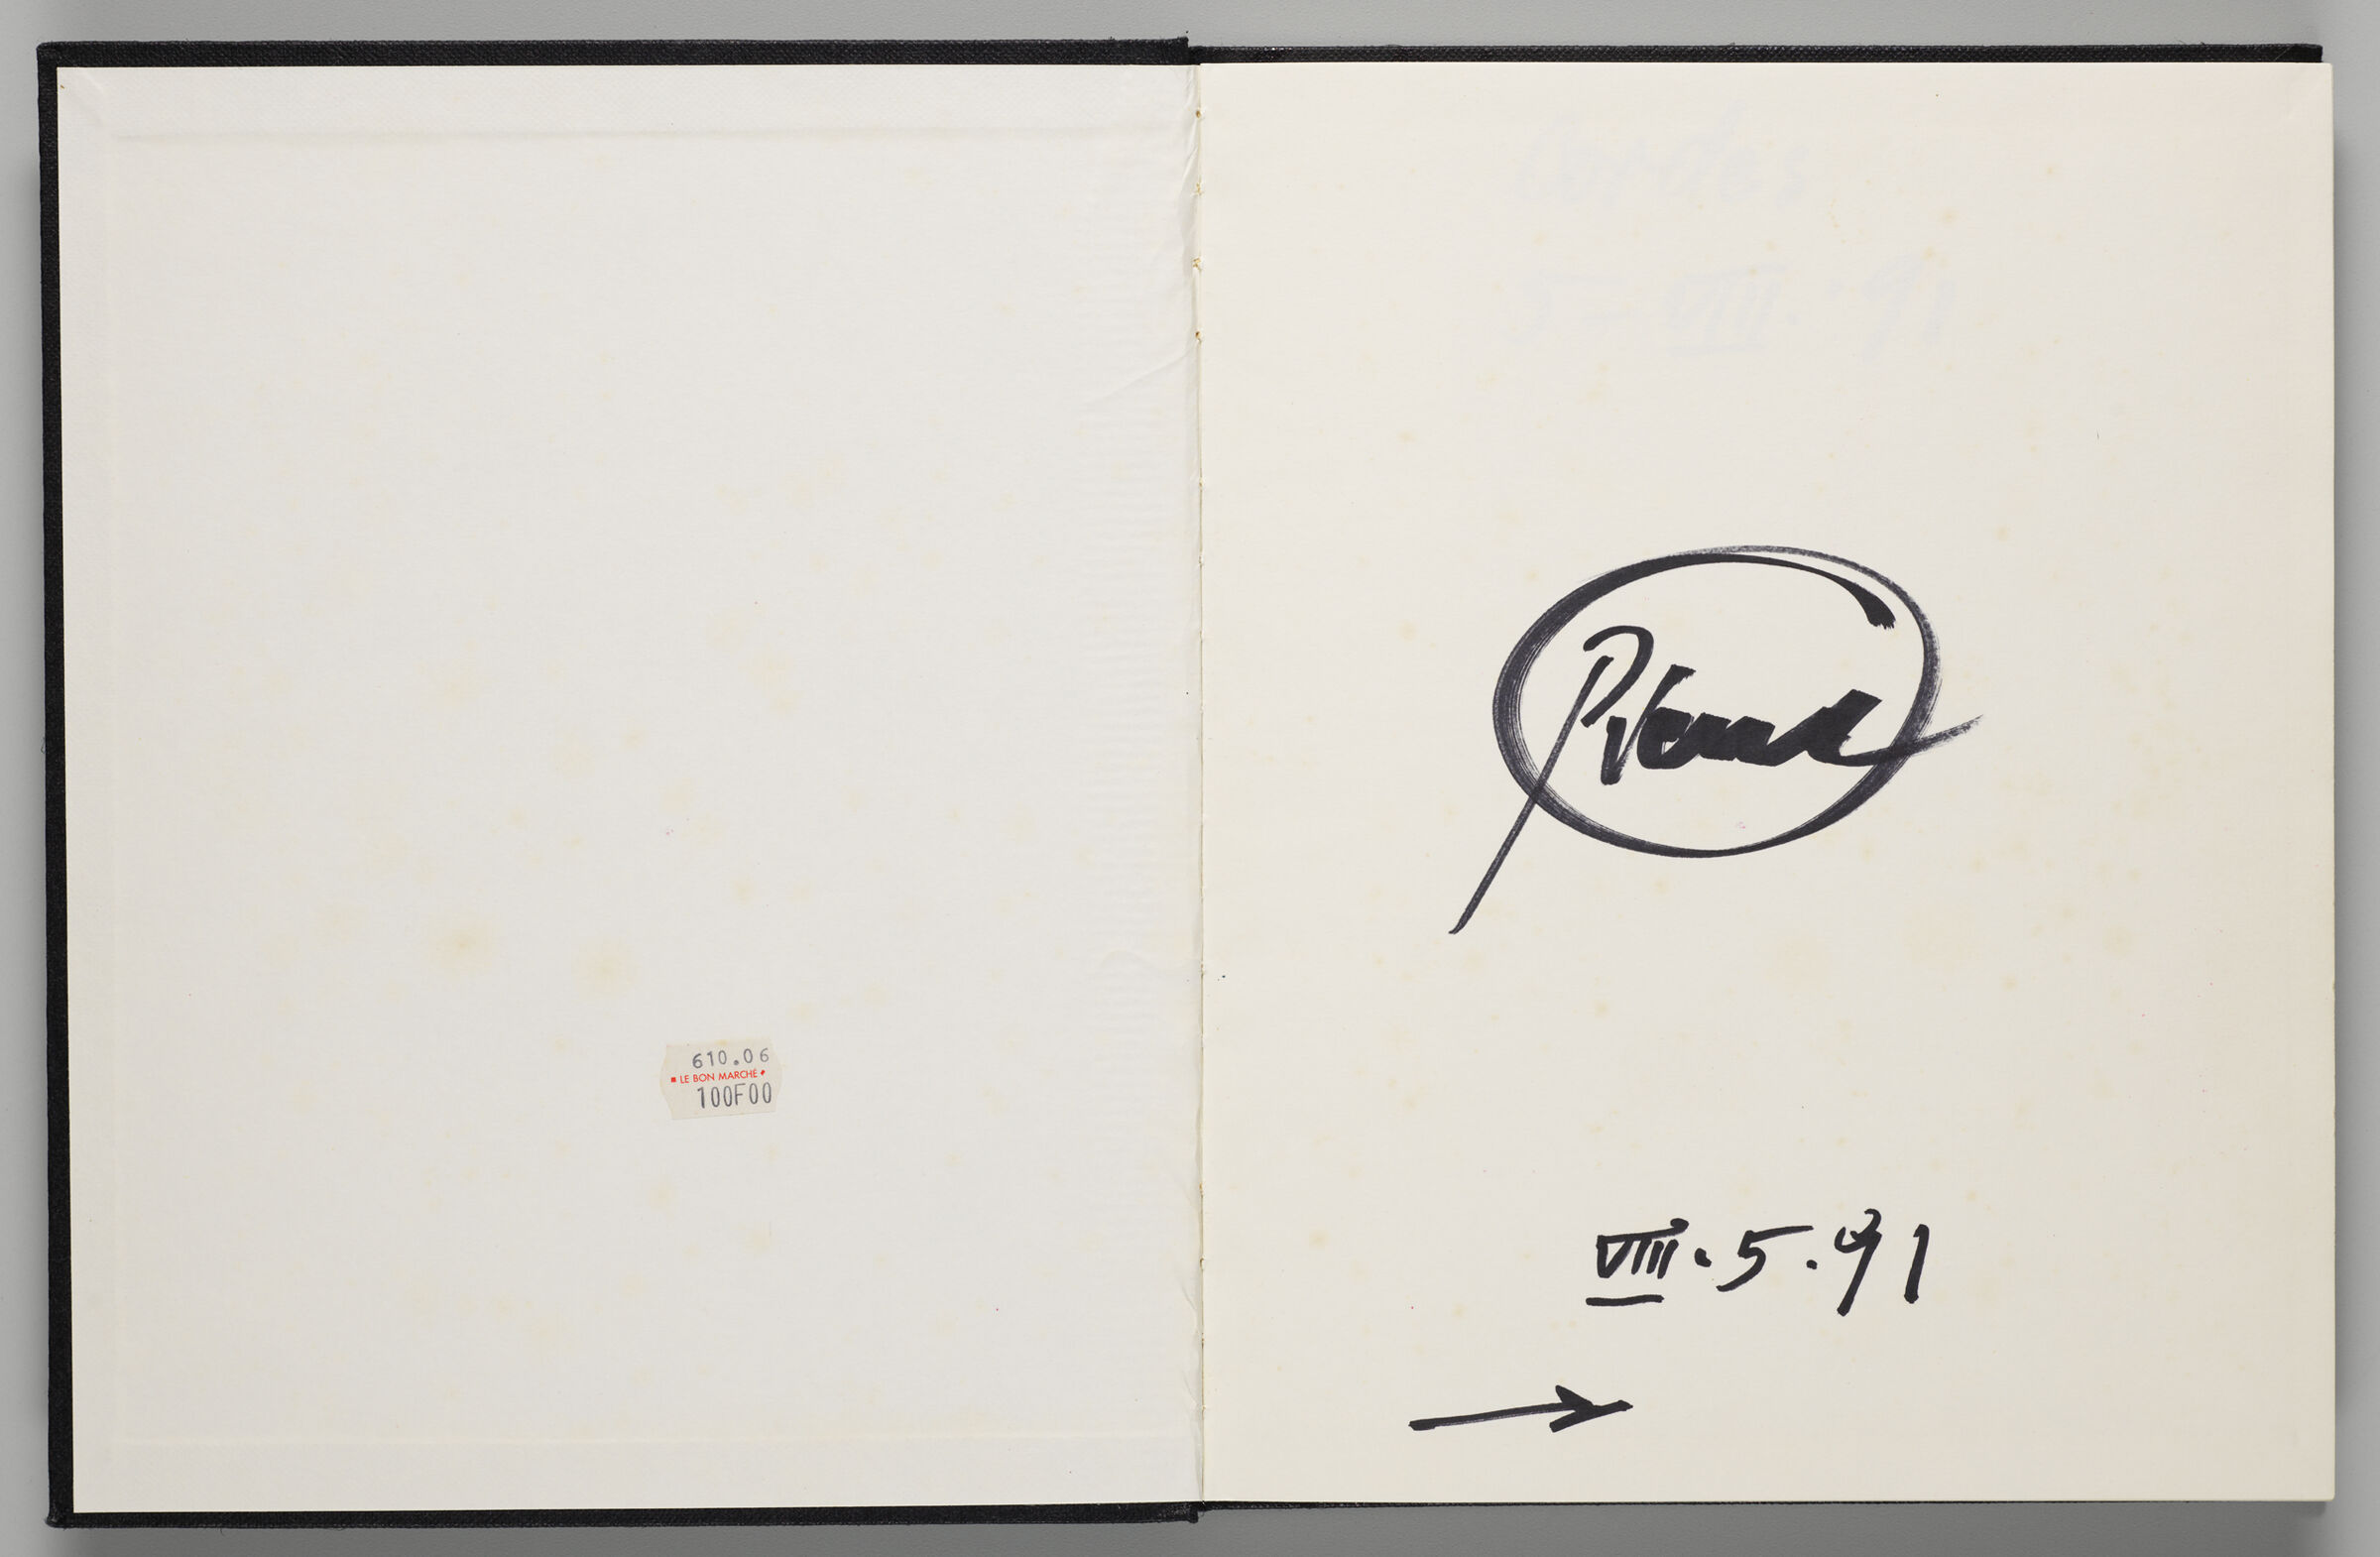 Untitled (Front Endpaper With Price Sticker, Left Page); Untitled (Signature, Right Page)